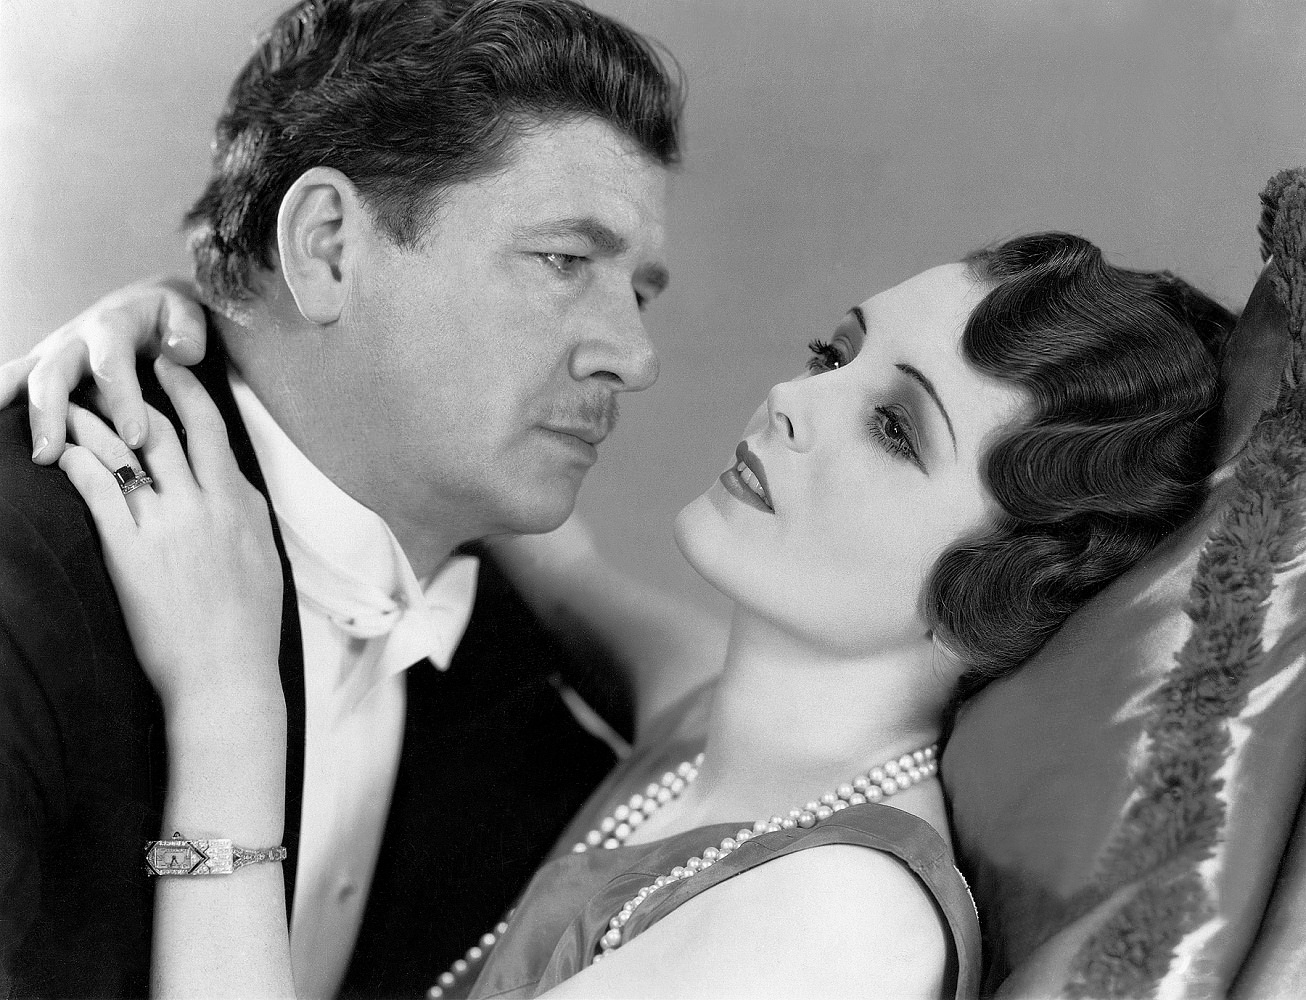 George Bancroft and Mary Astor in Ladies love brutes, 1930